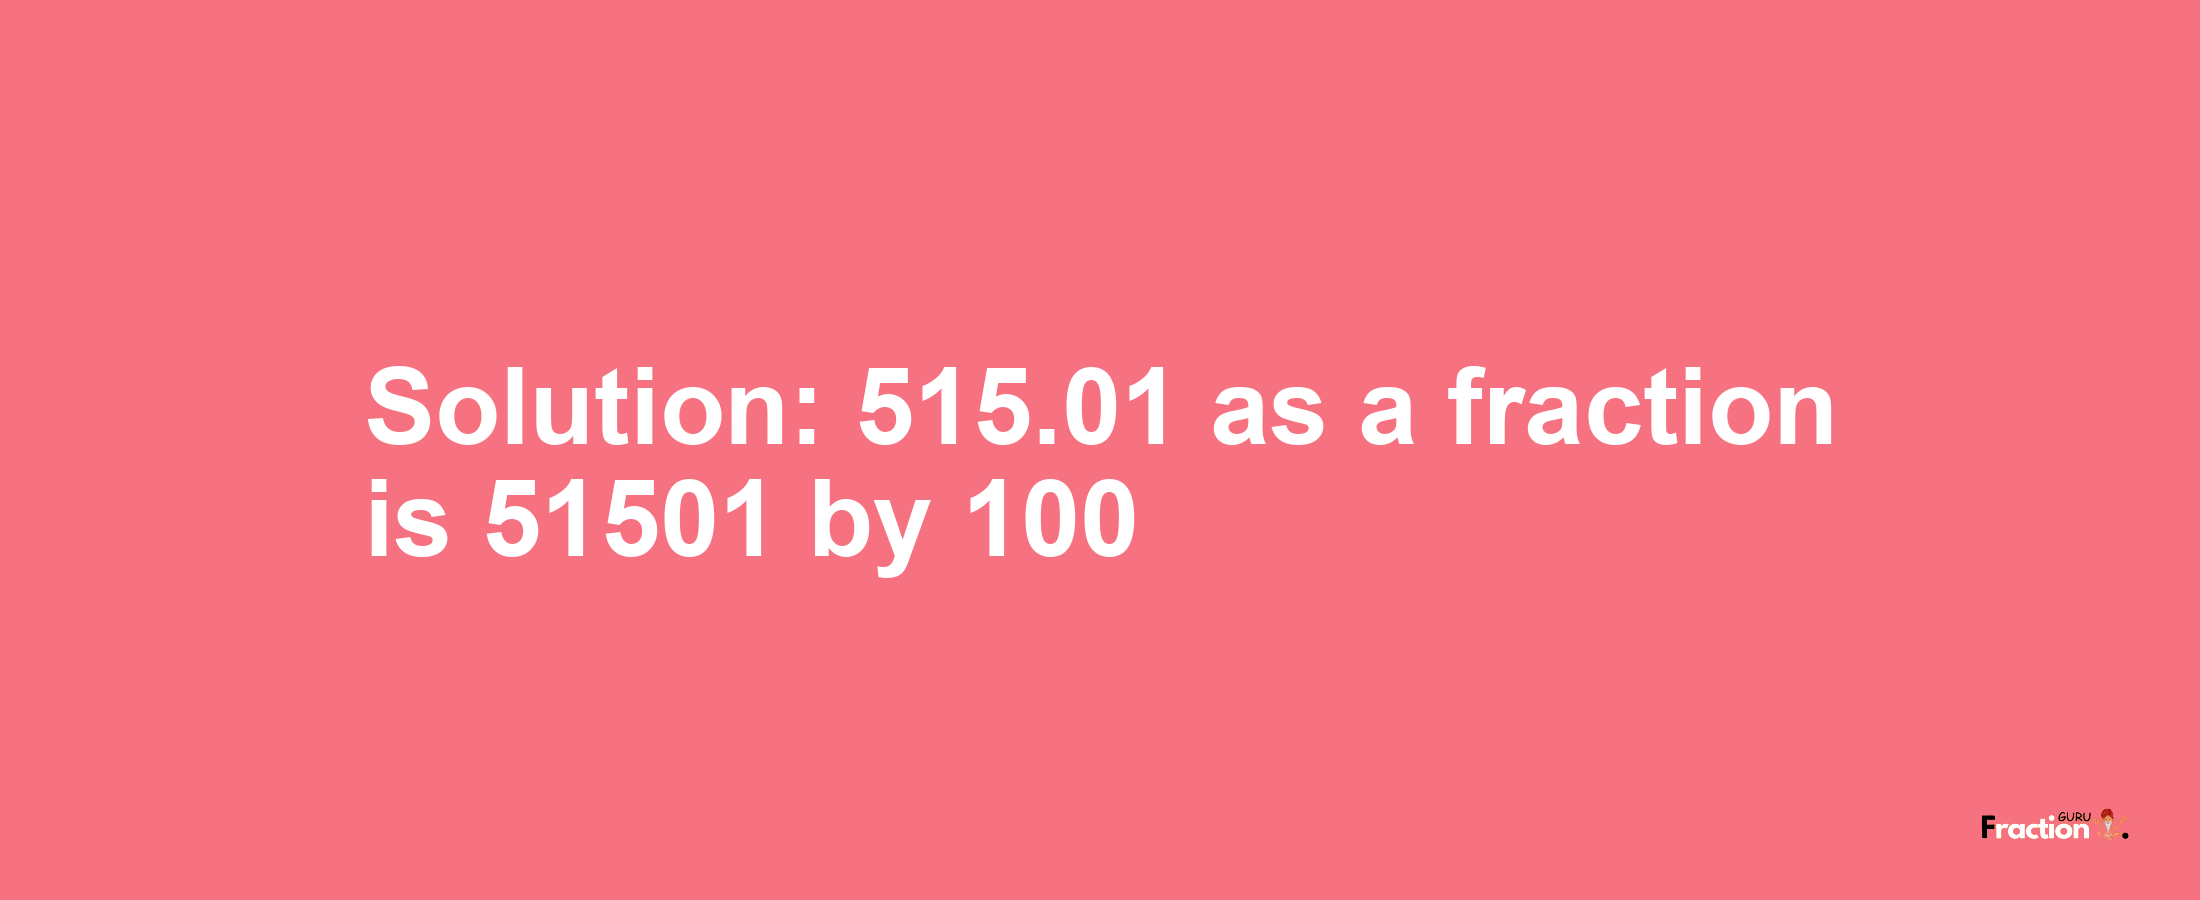 Solution:515.01 as a fraction is 51501/100